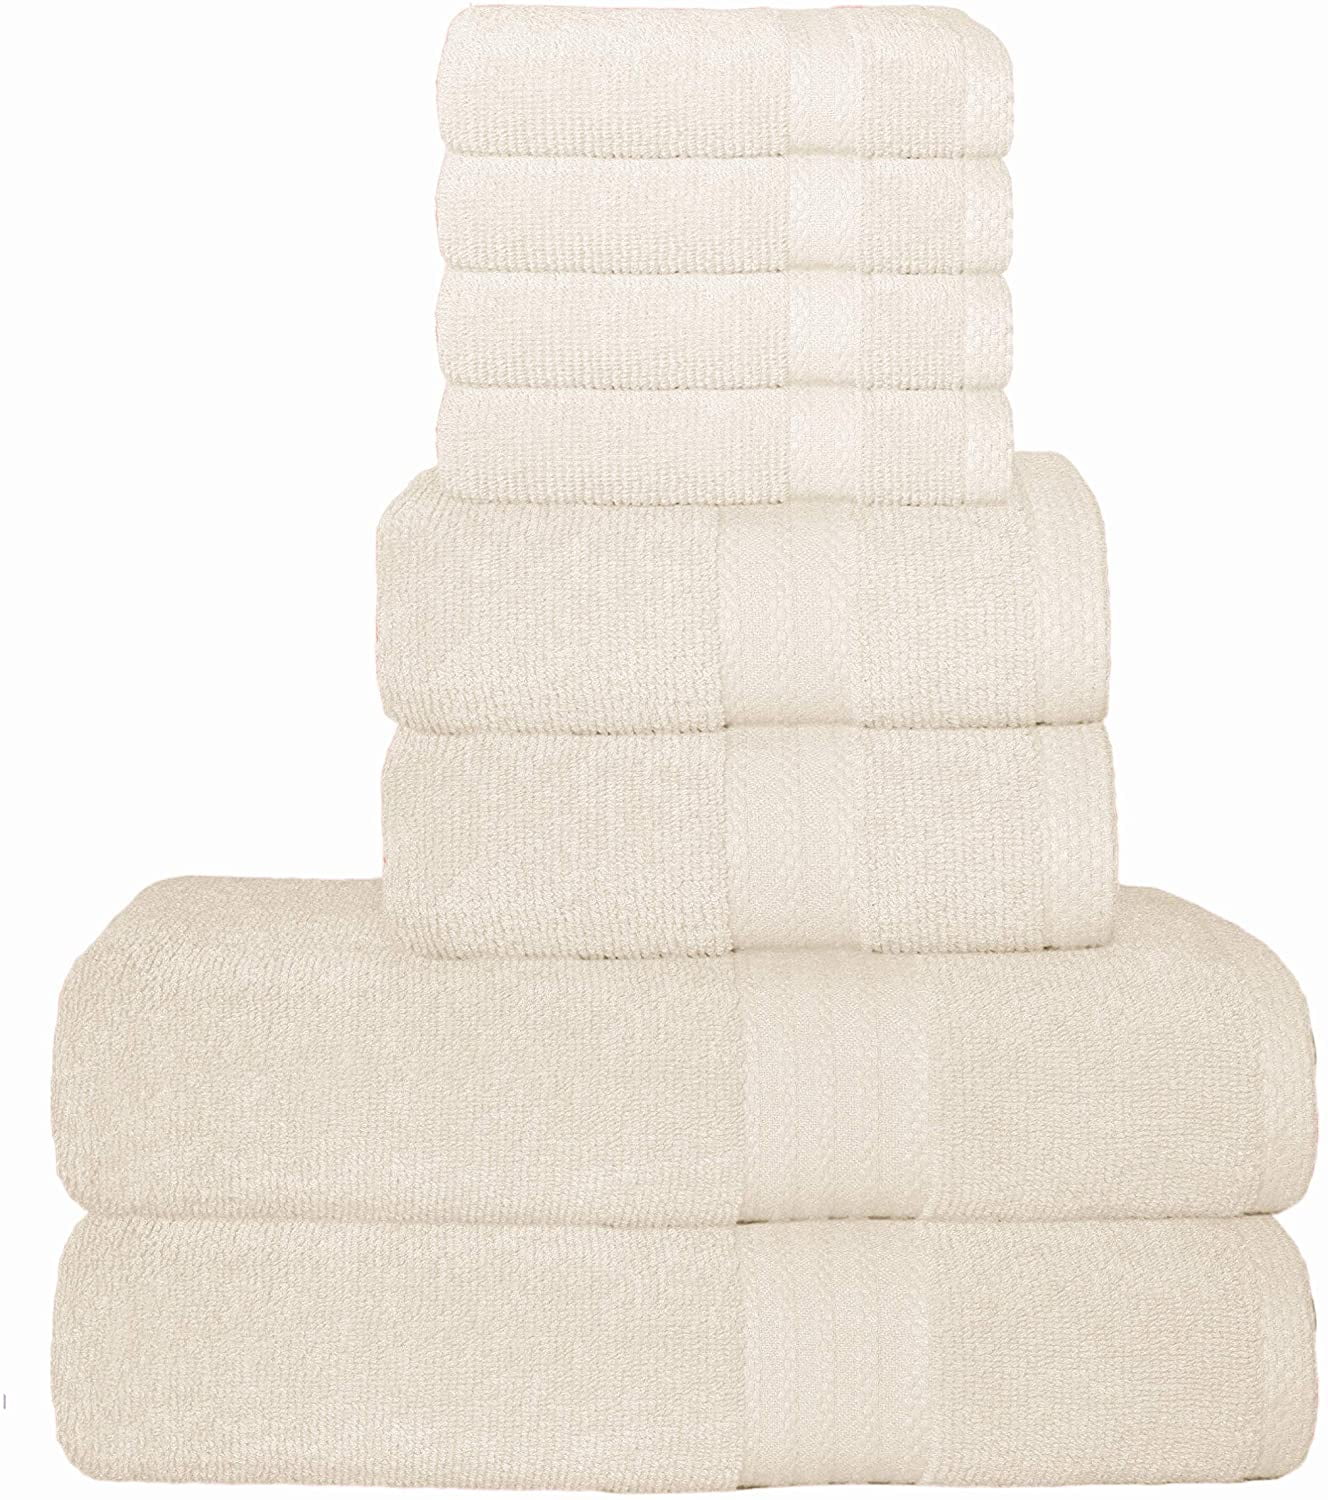 Cotton Craft Simplicity Ringspun Cotton Set of 7 Lightweight Bath Towels, 27 inch x 52 inch, White